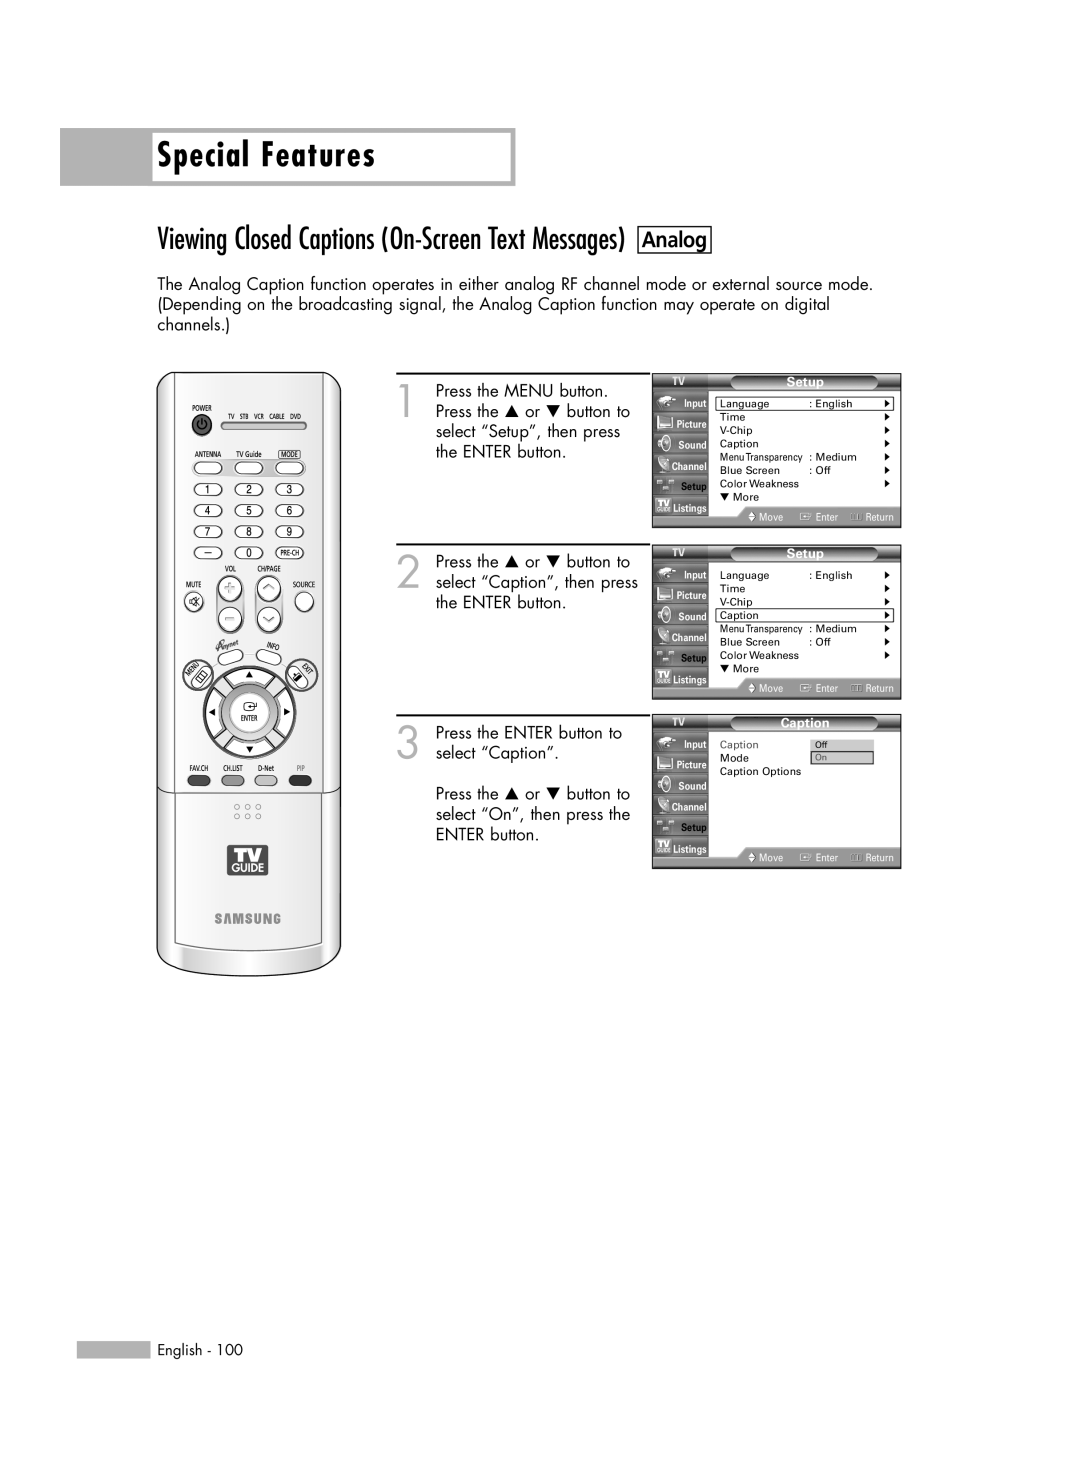 Samsung HL-R5688W manual Special Features, Analog, Viewing Closed Captions On-Screen Text Messages 